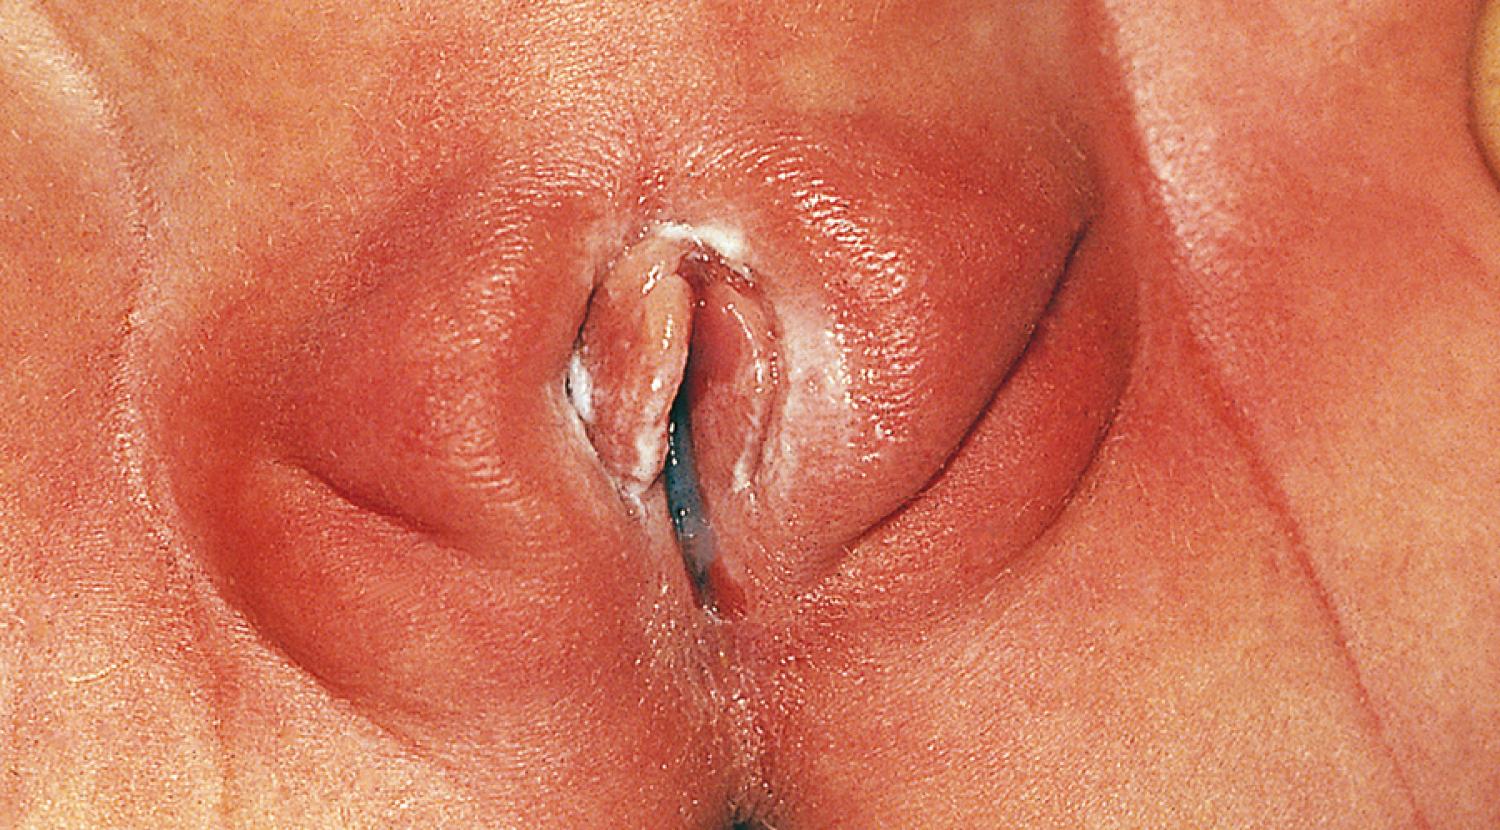 Fig. 19.1, Normal appearance of the genitalia in a newborn. The labia majora are full, and the thickened labia minora protrude between them. The mucosa is pink, and a milky white discharge is seen, reflecting stimulation by maternal hormones.